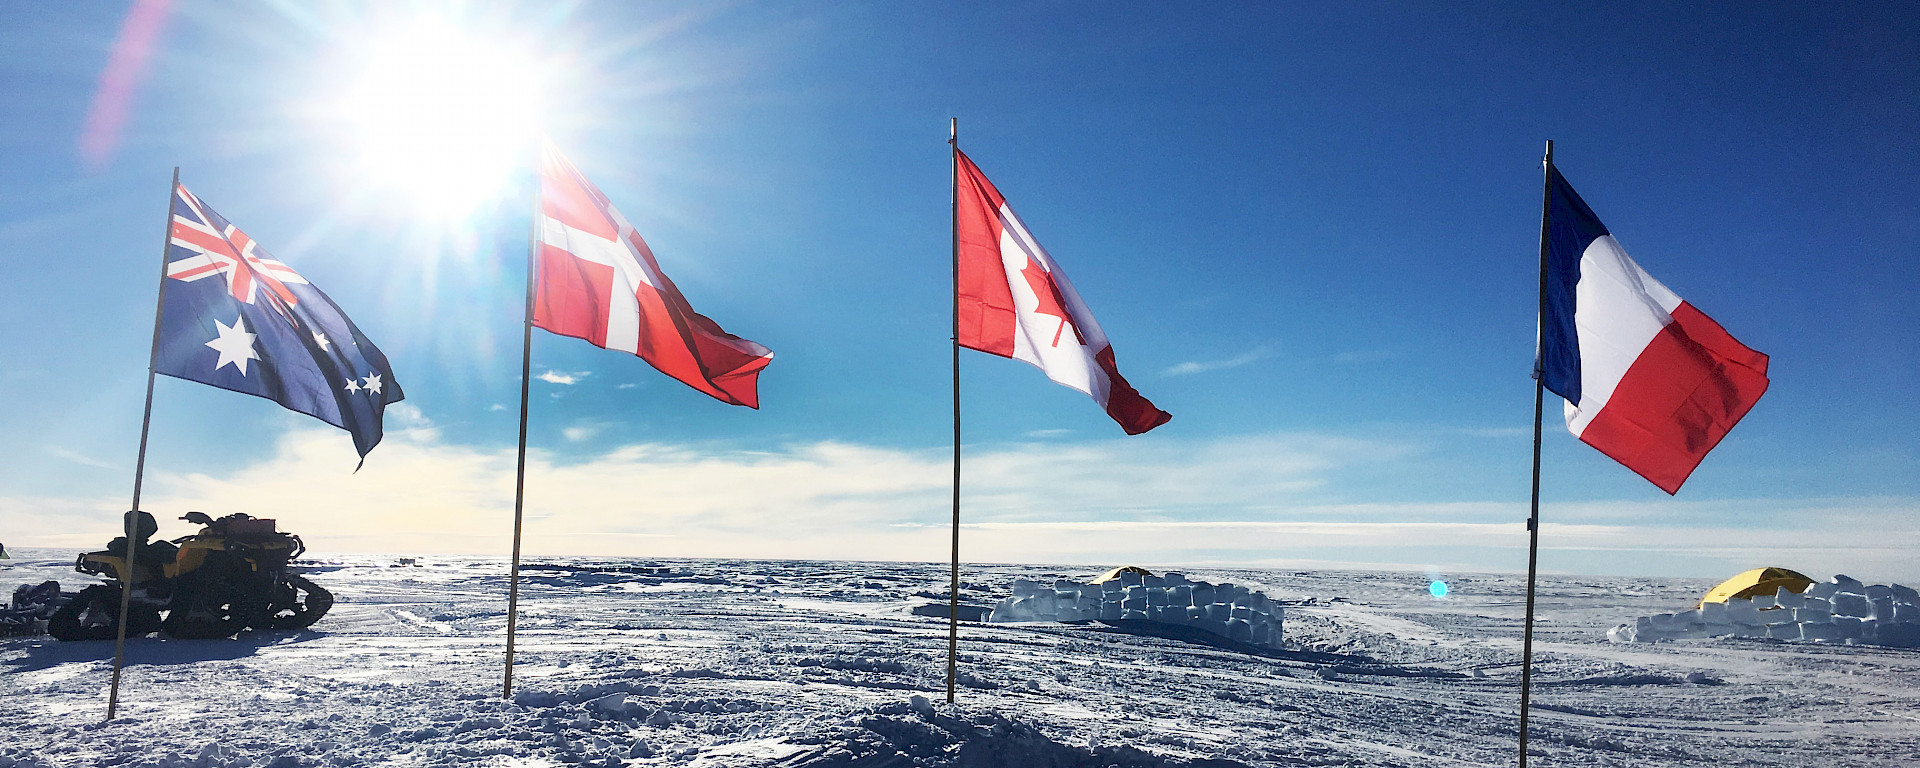 International flags of the participating nations fly over the Mount Brown ice core drill site